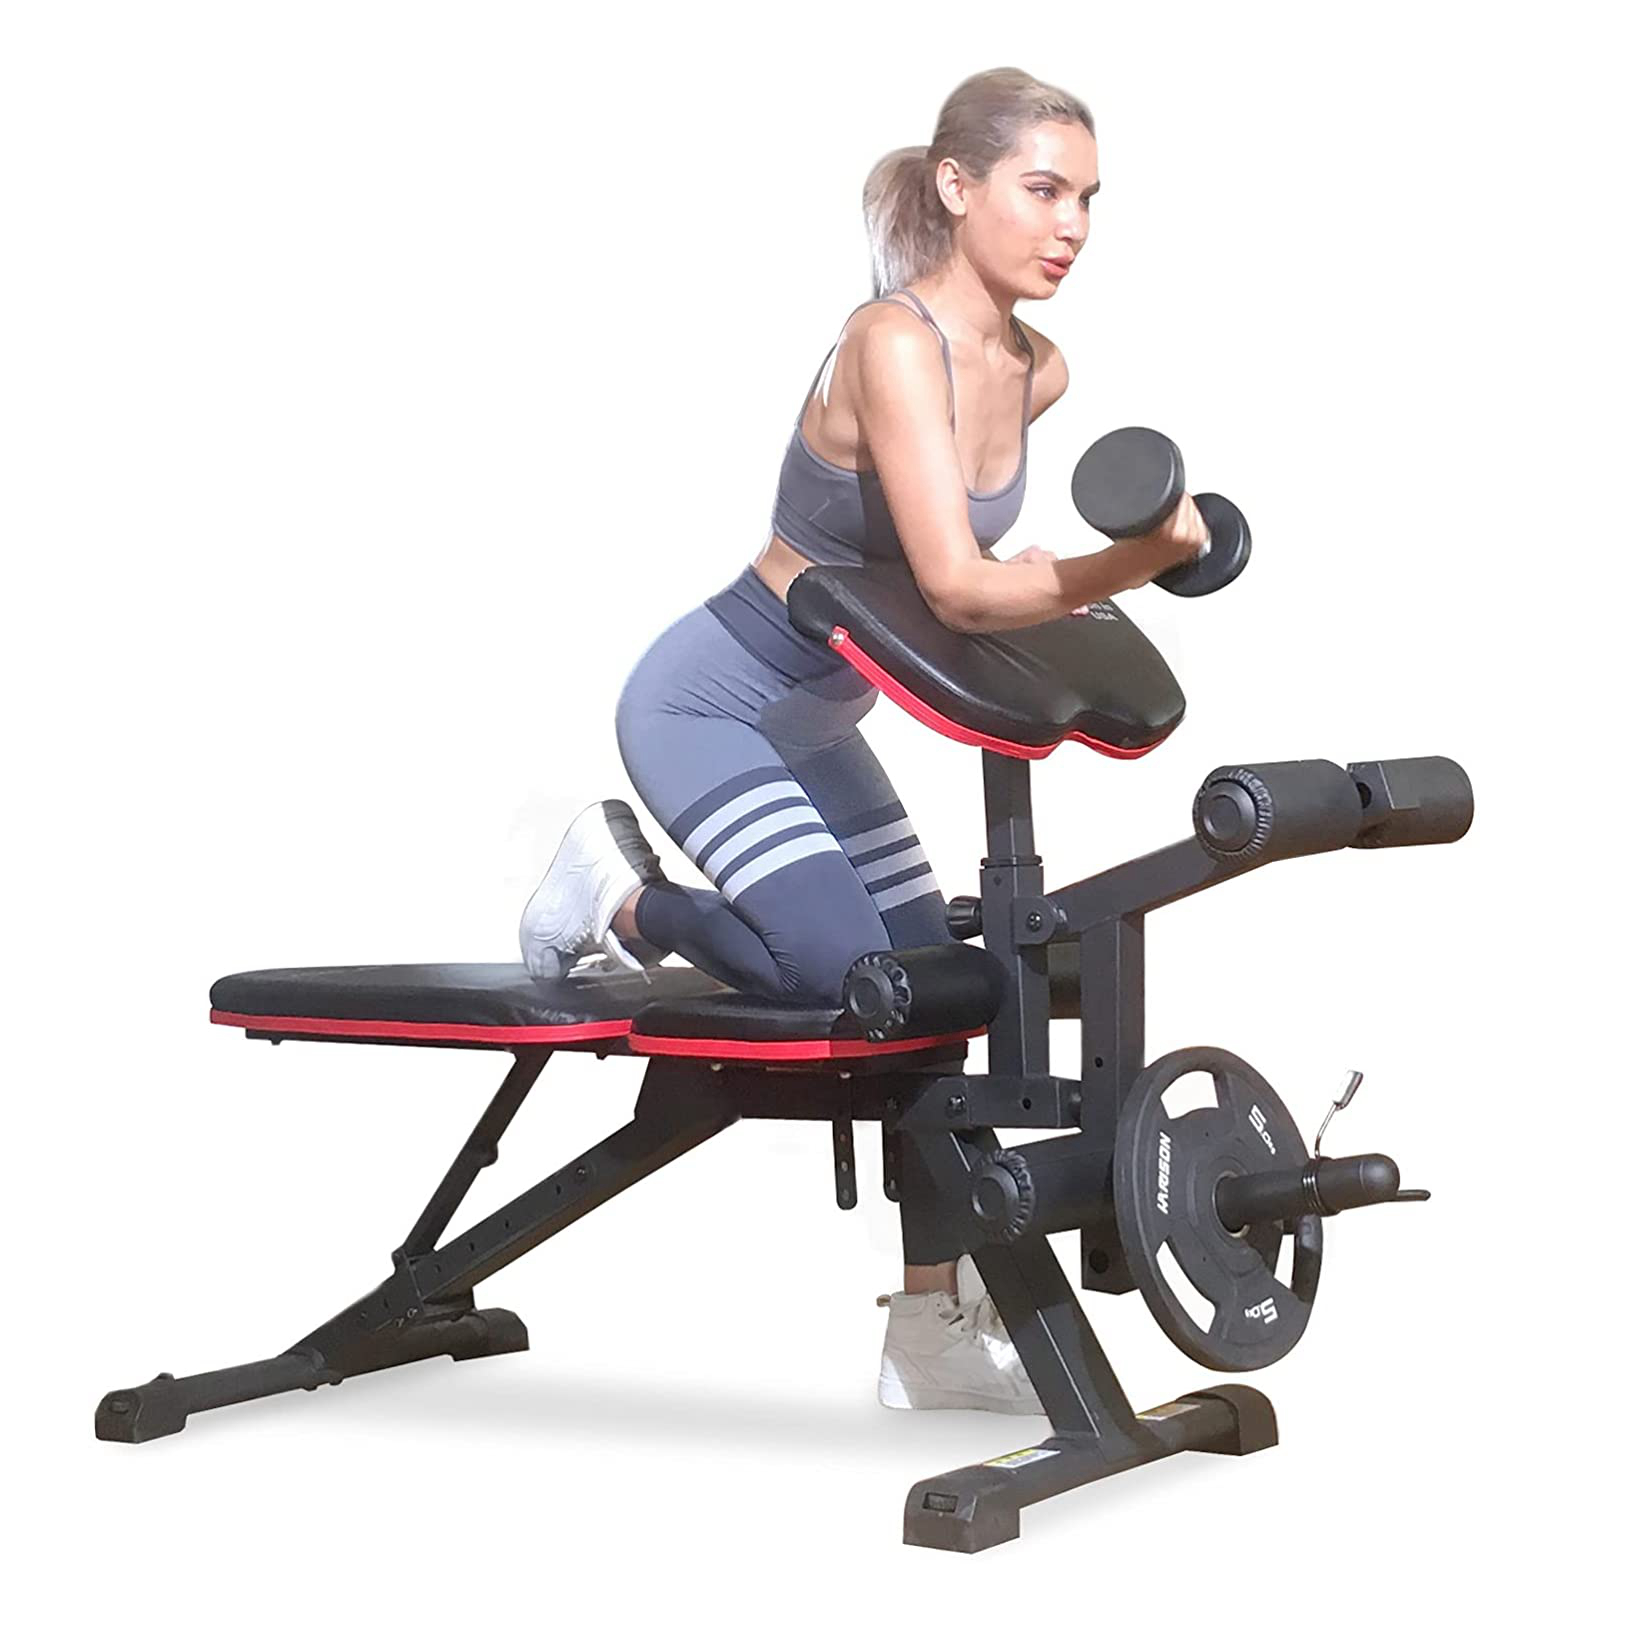 ADJUSTABLE WEIGHT BENCH Full Body Workout Home Gym Exercise Incline Flat Abs Pre 